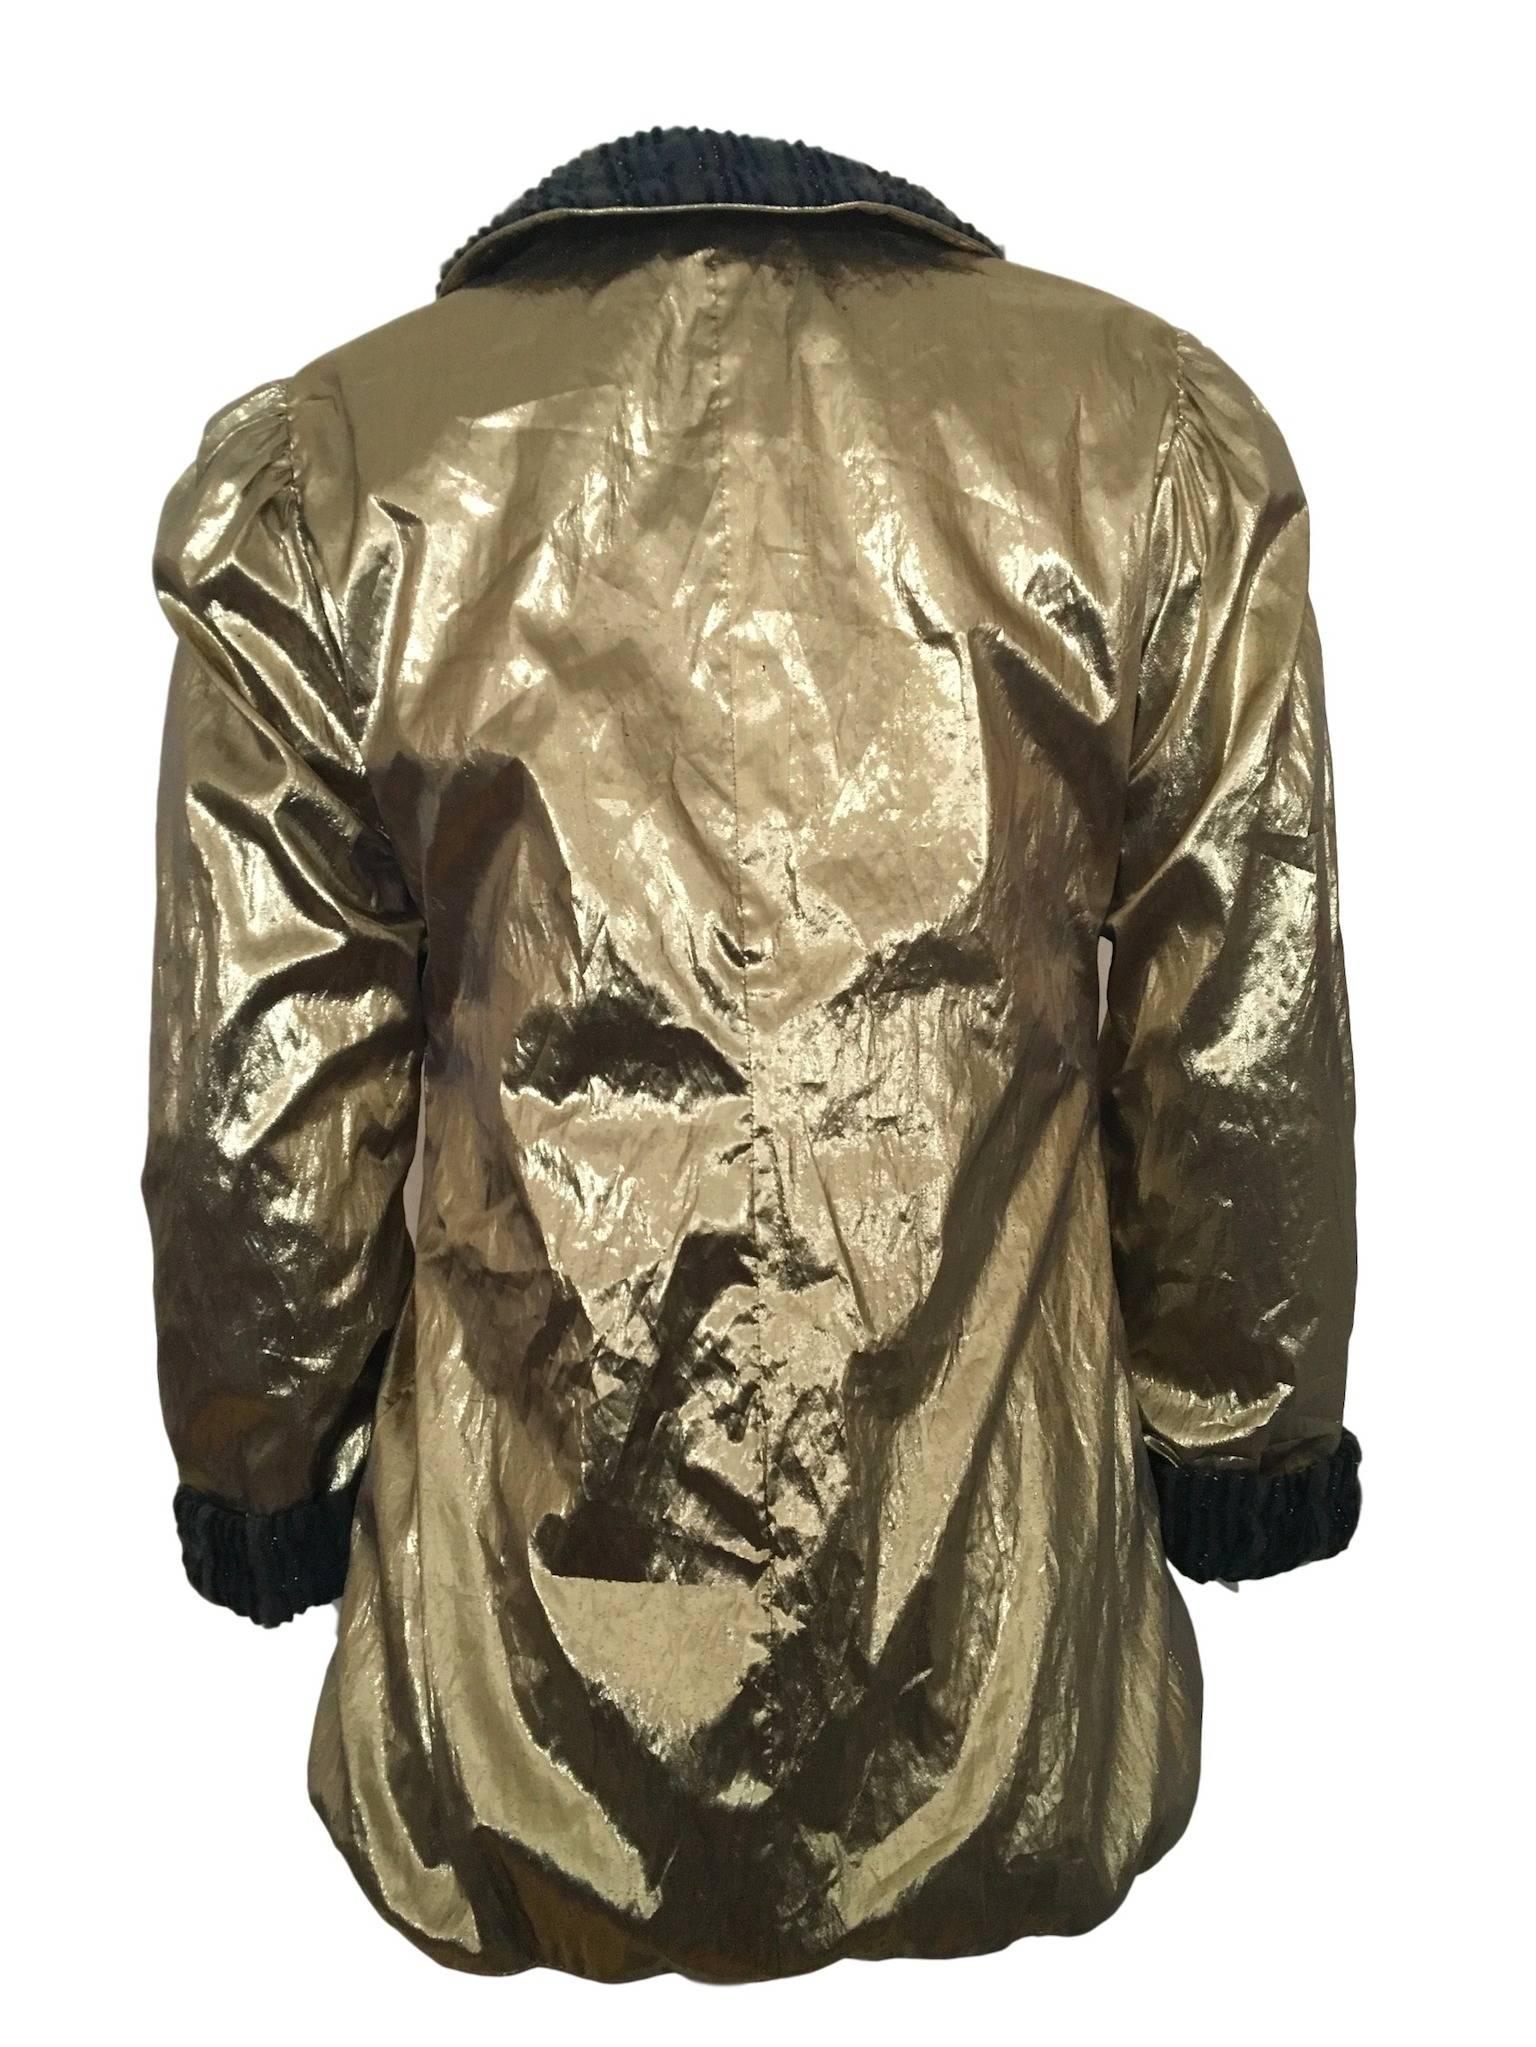 1980s vintage reversible David Butler jacket, gold metallic one side and black textured striped design the other. Great shoulders and collar feature.

Excellent condition However it is missing one button the gold side.

Size UK 10, measures 18